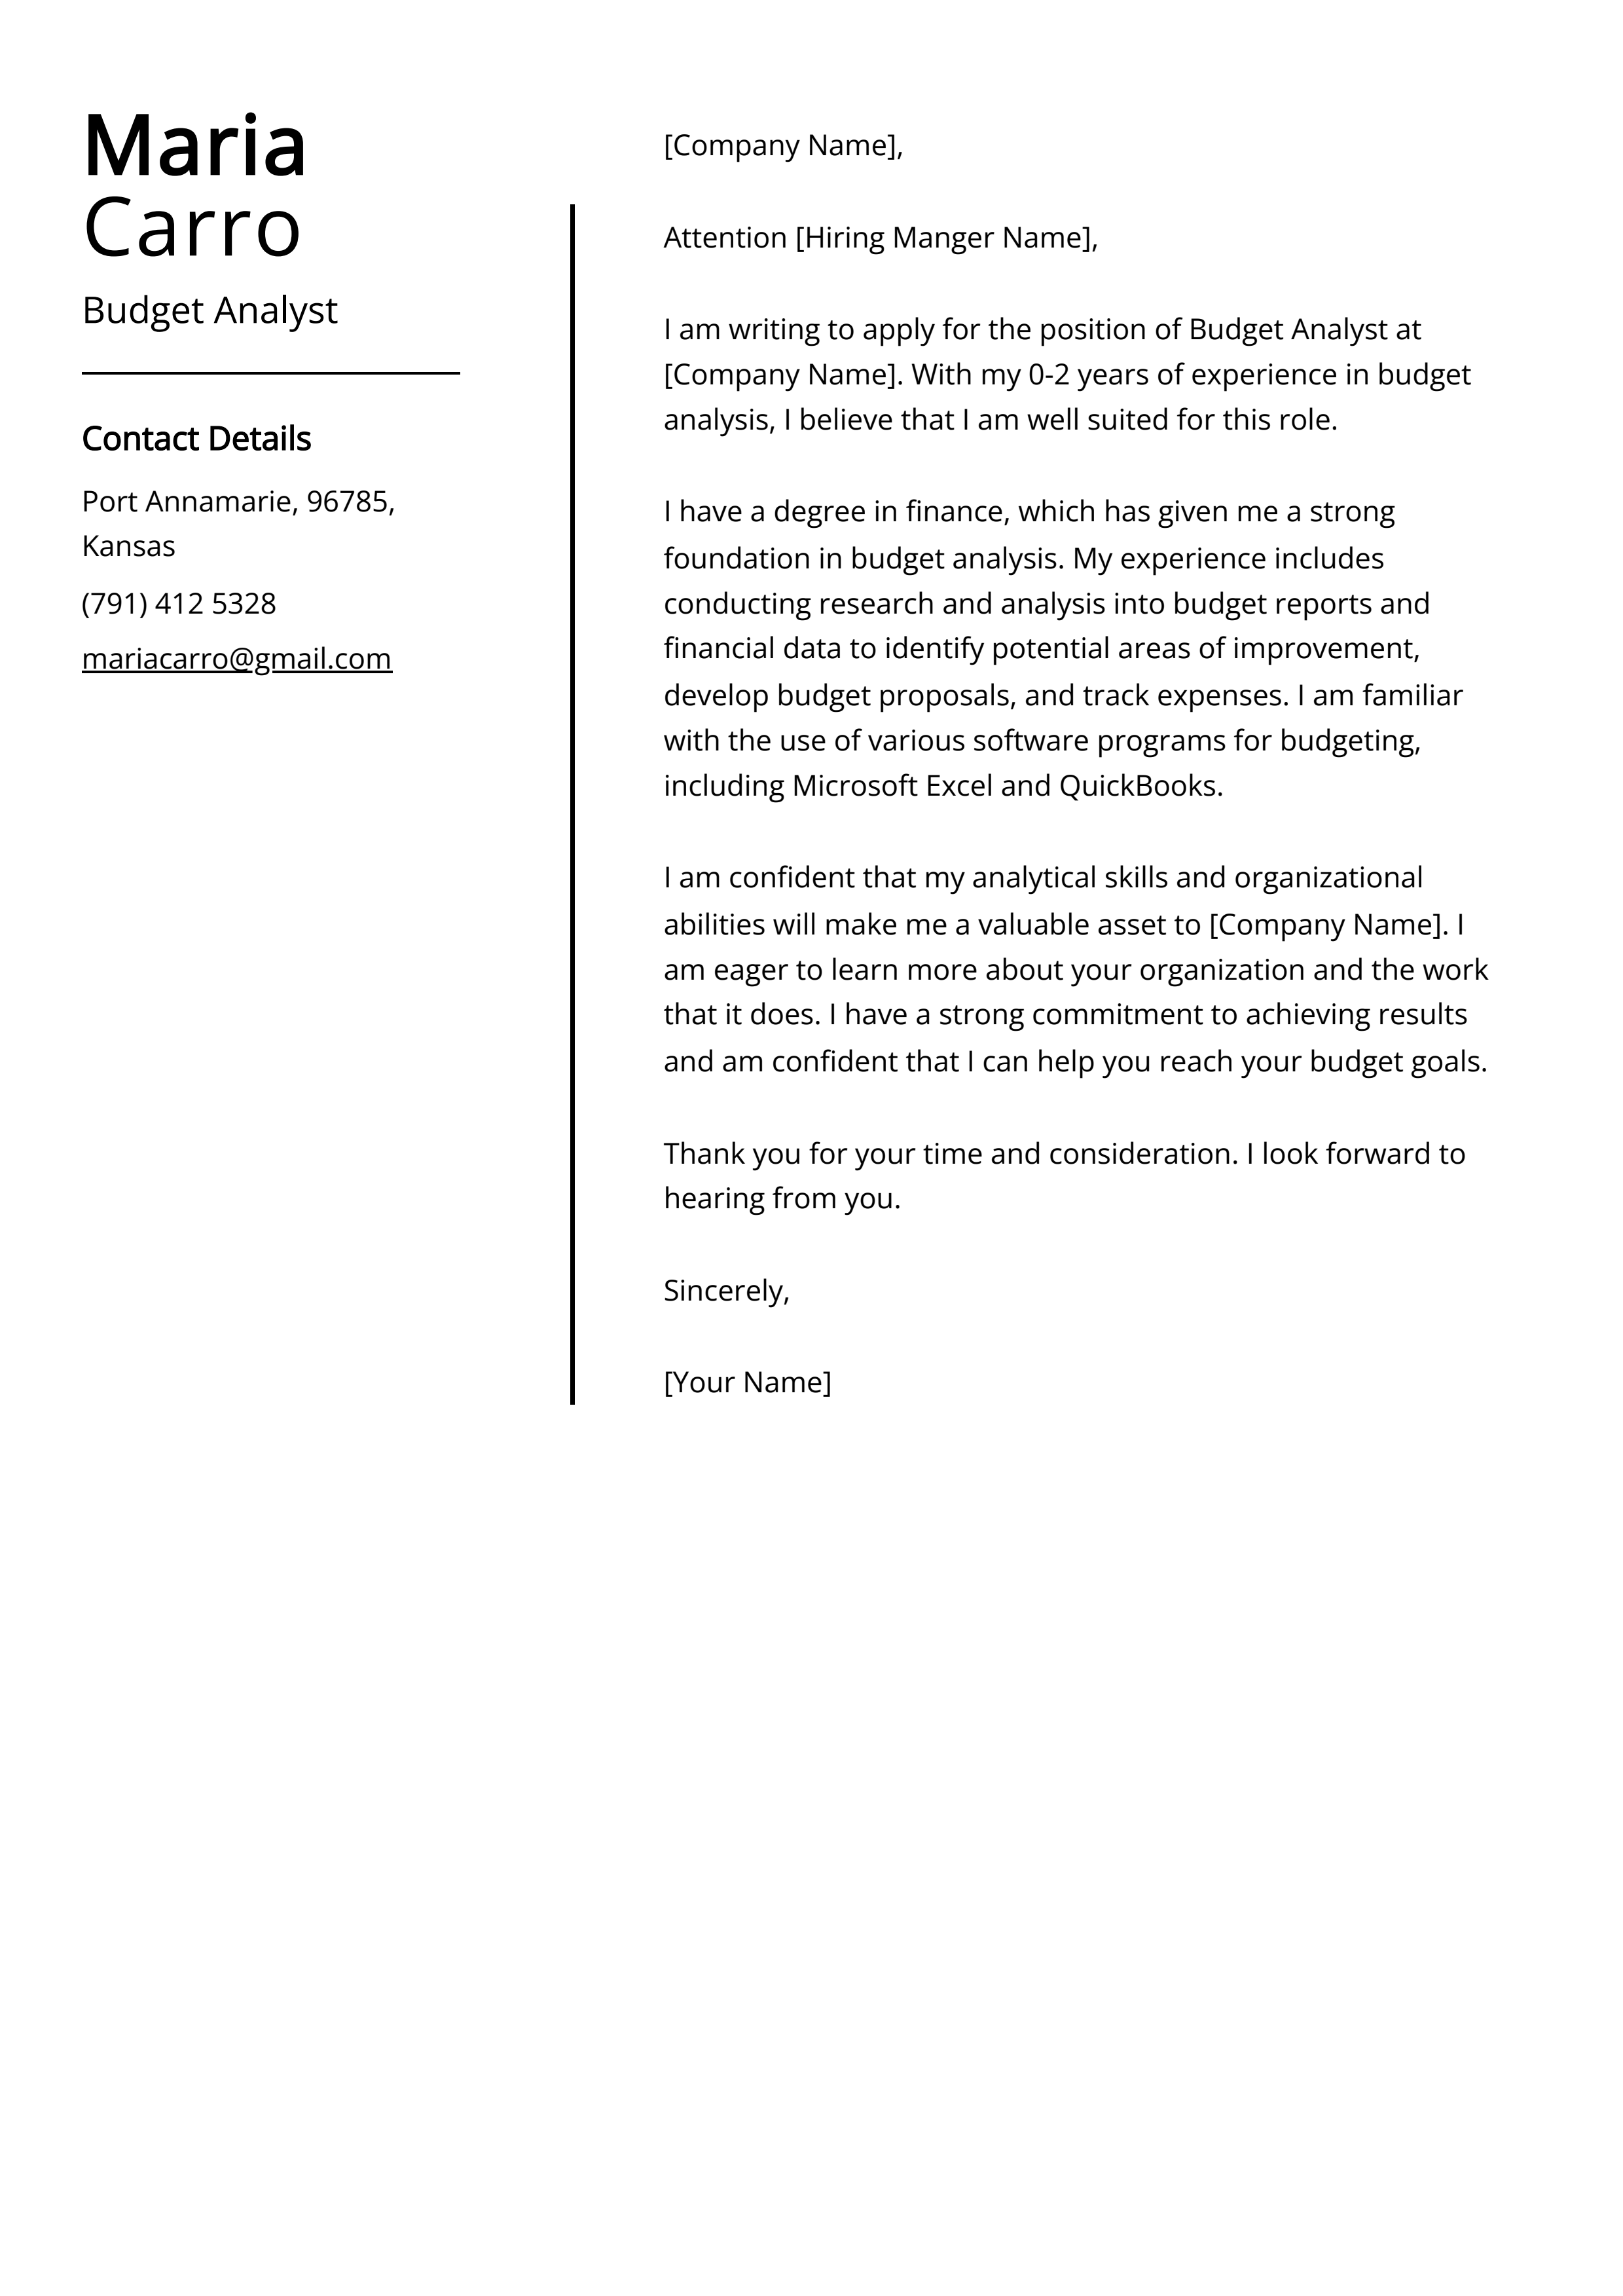 Budget Analyst Cover Letter Example